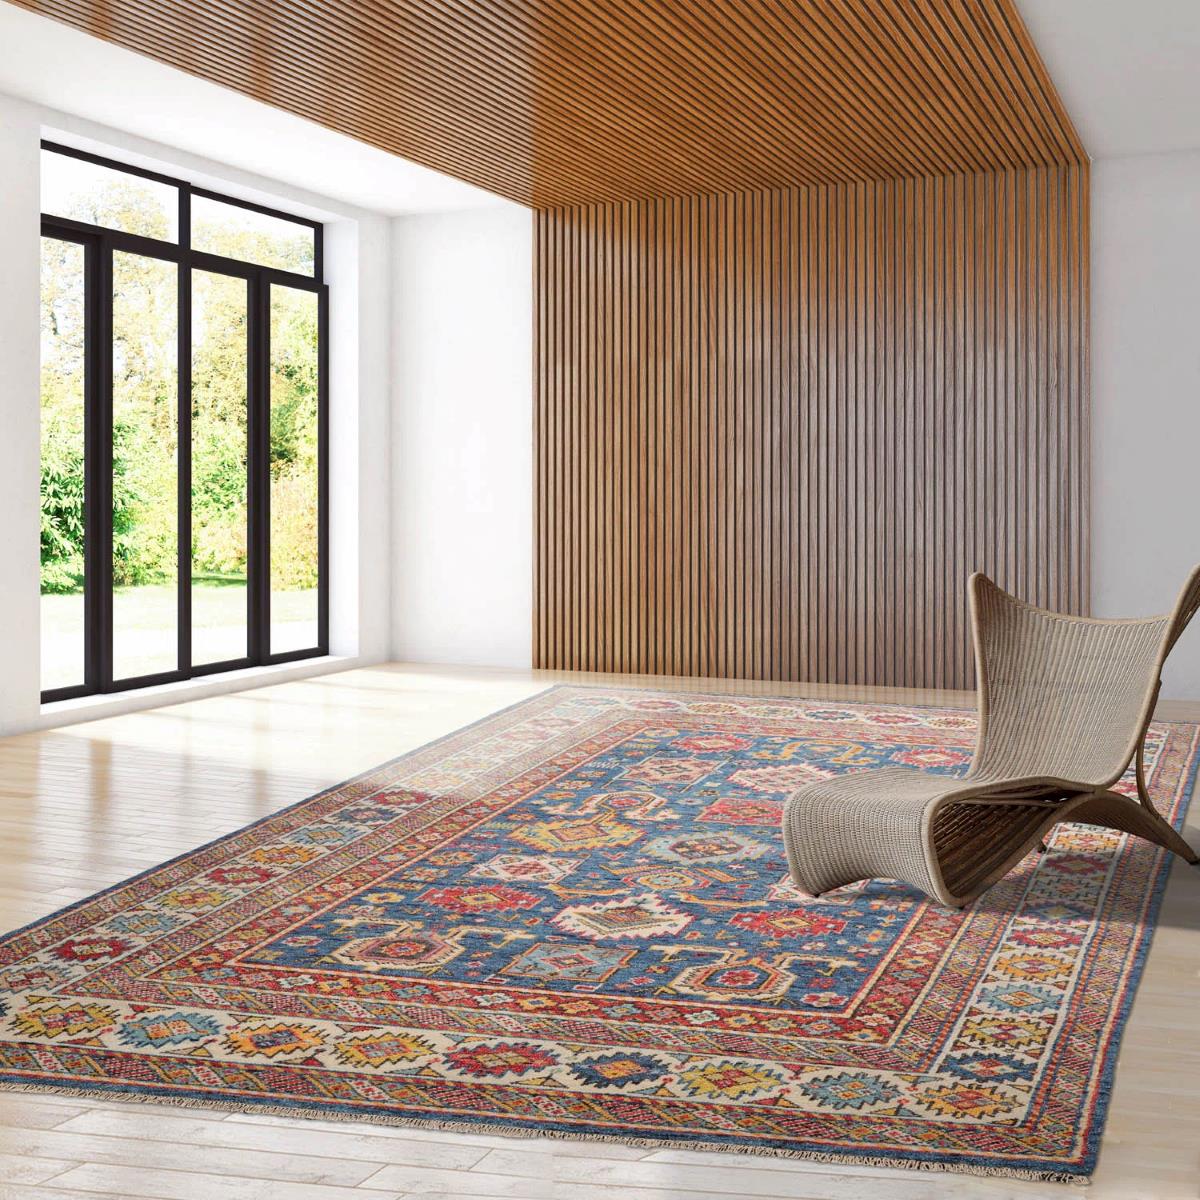 How To Wash A Wool Oriental Rug